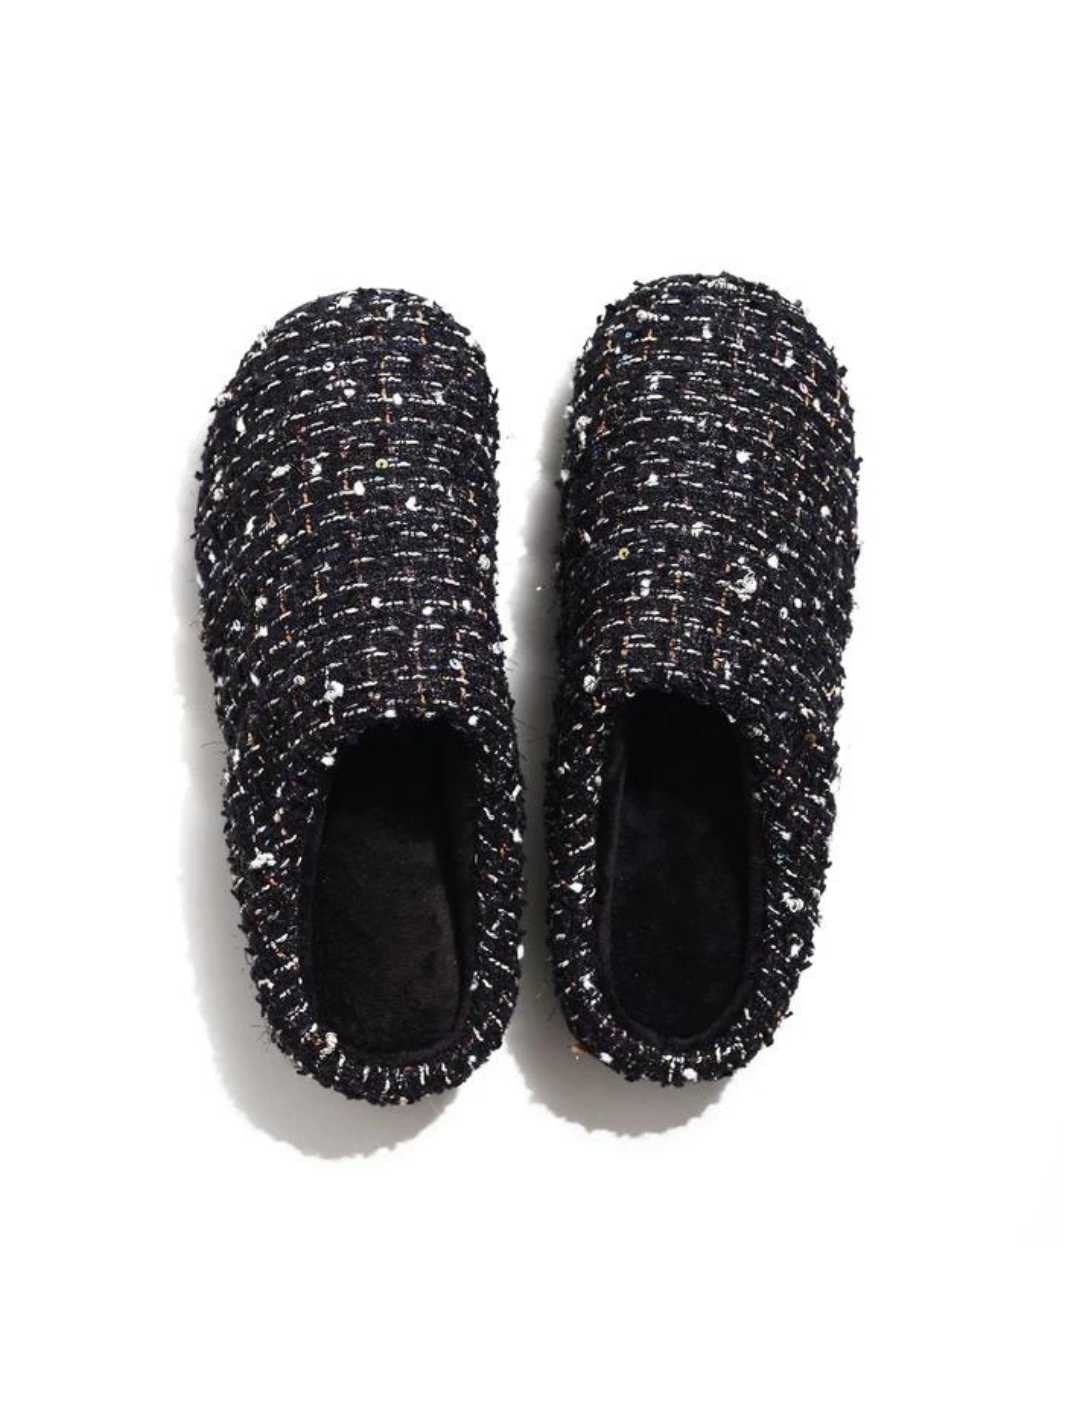 Subu Shoes Slip-On | Slippers Concept Prism